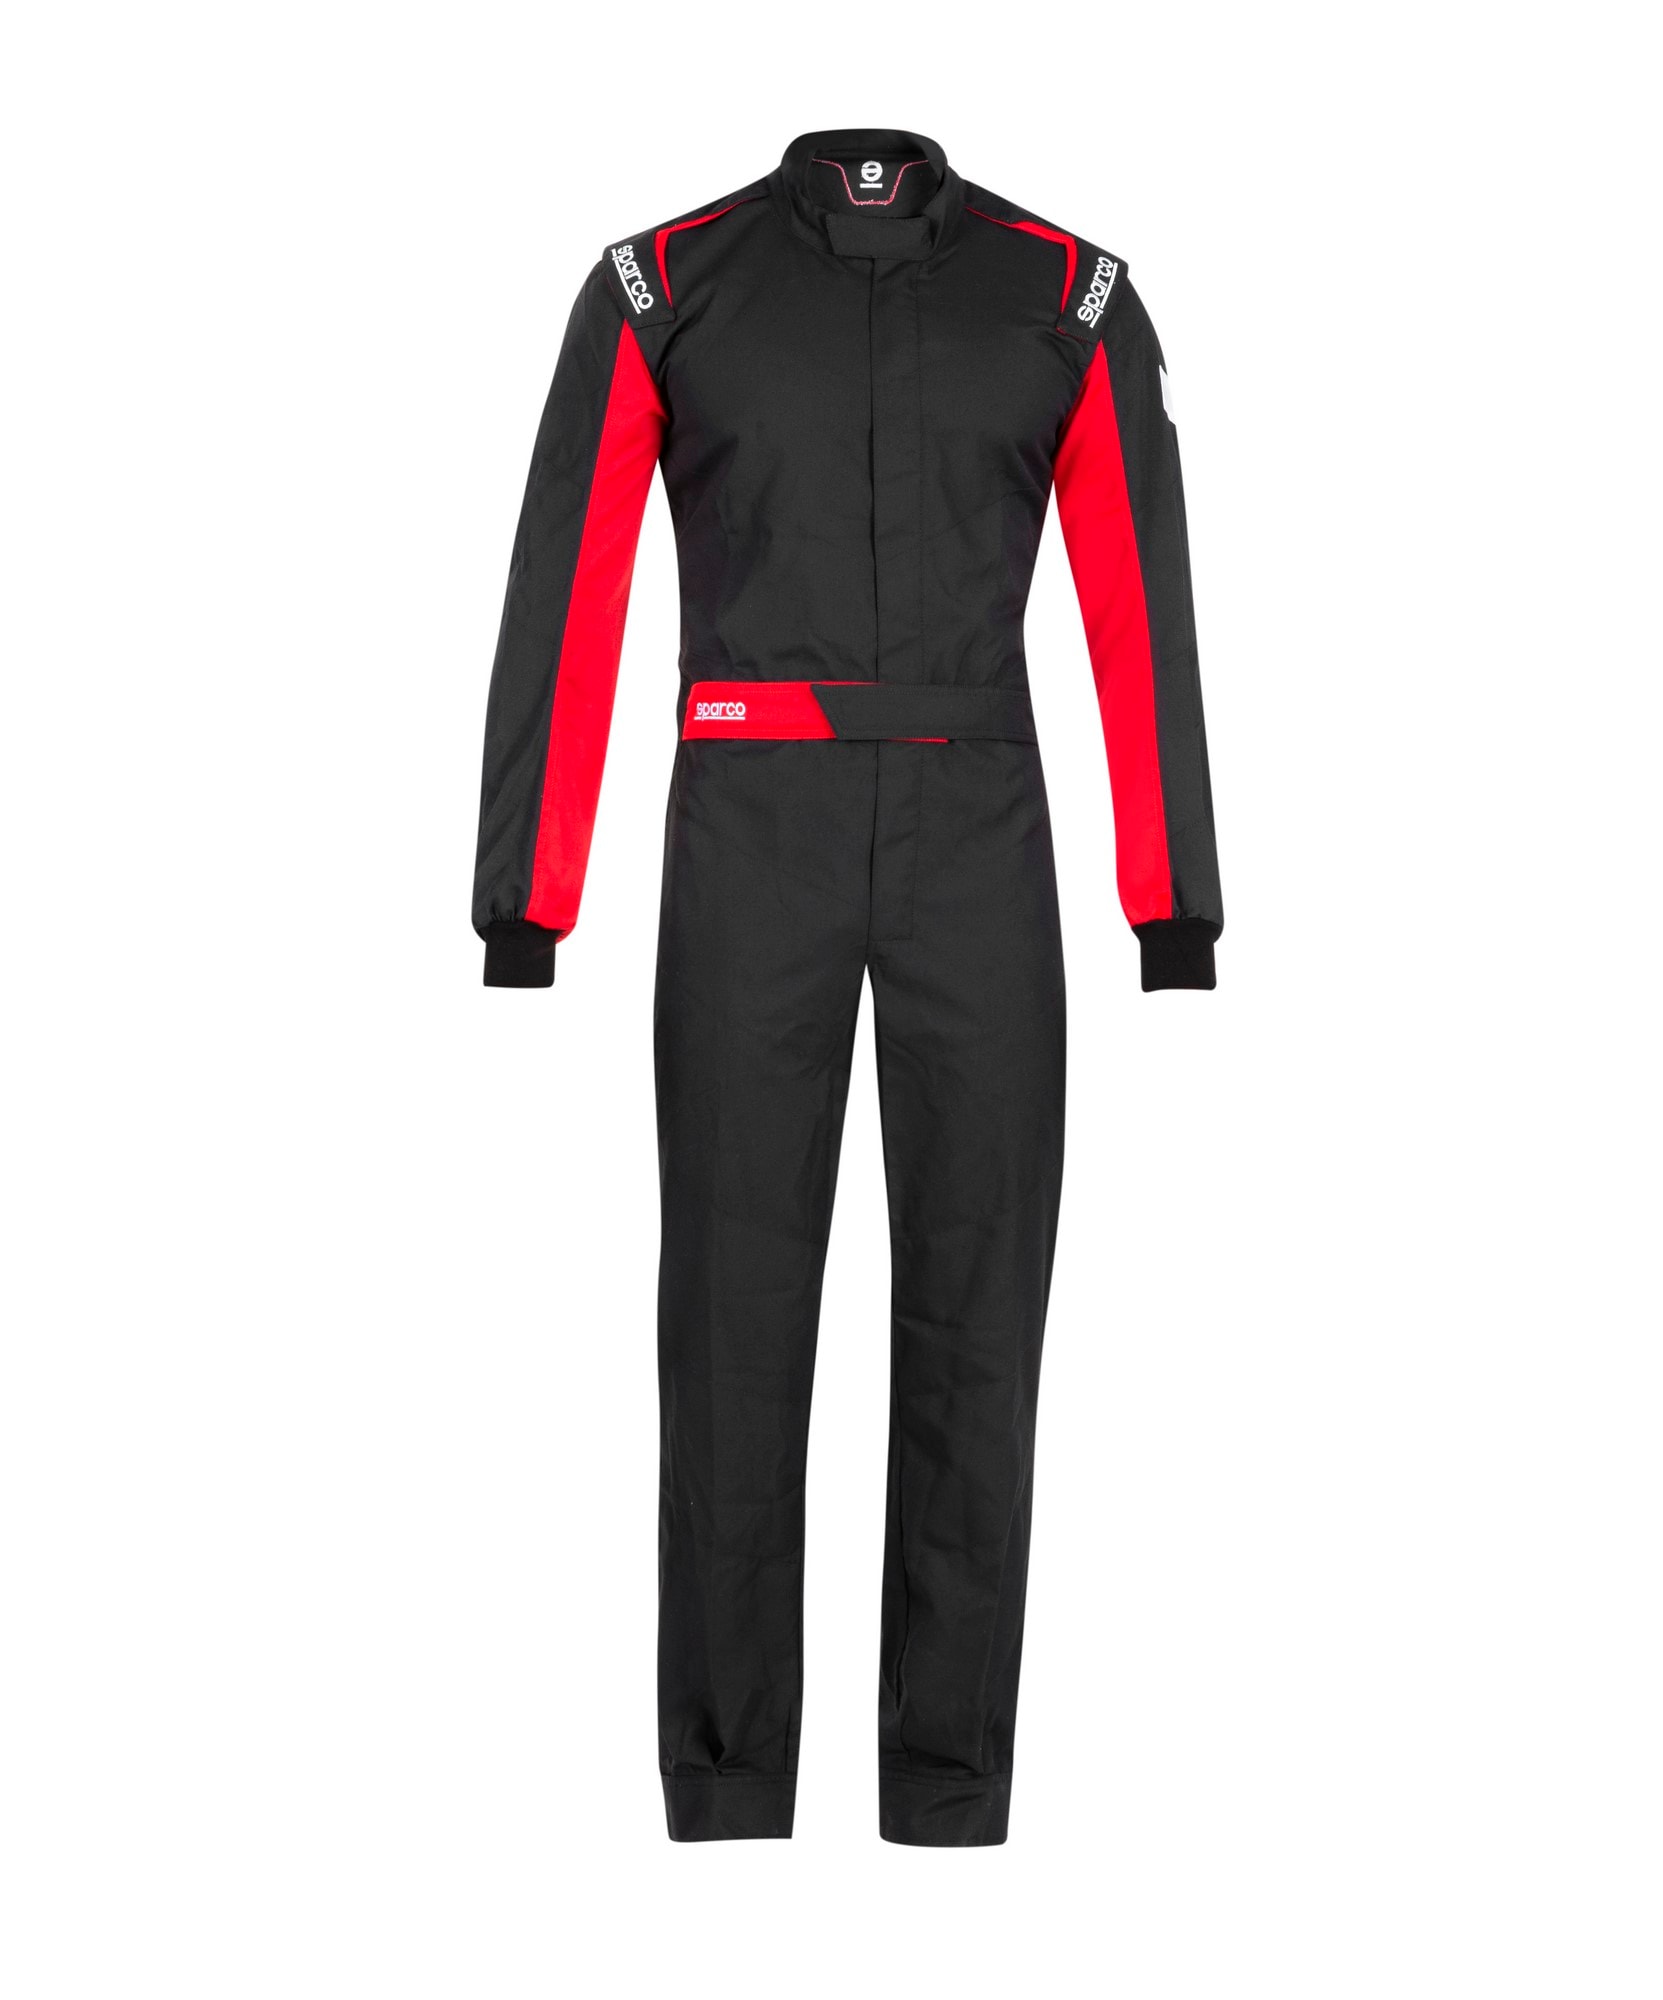 Racing Suit Sparco One SFI Black/Red